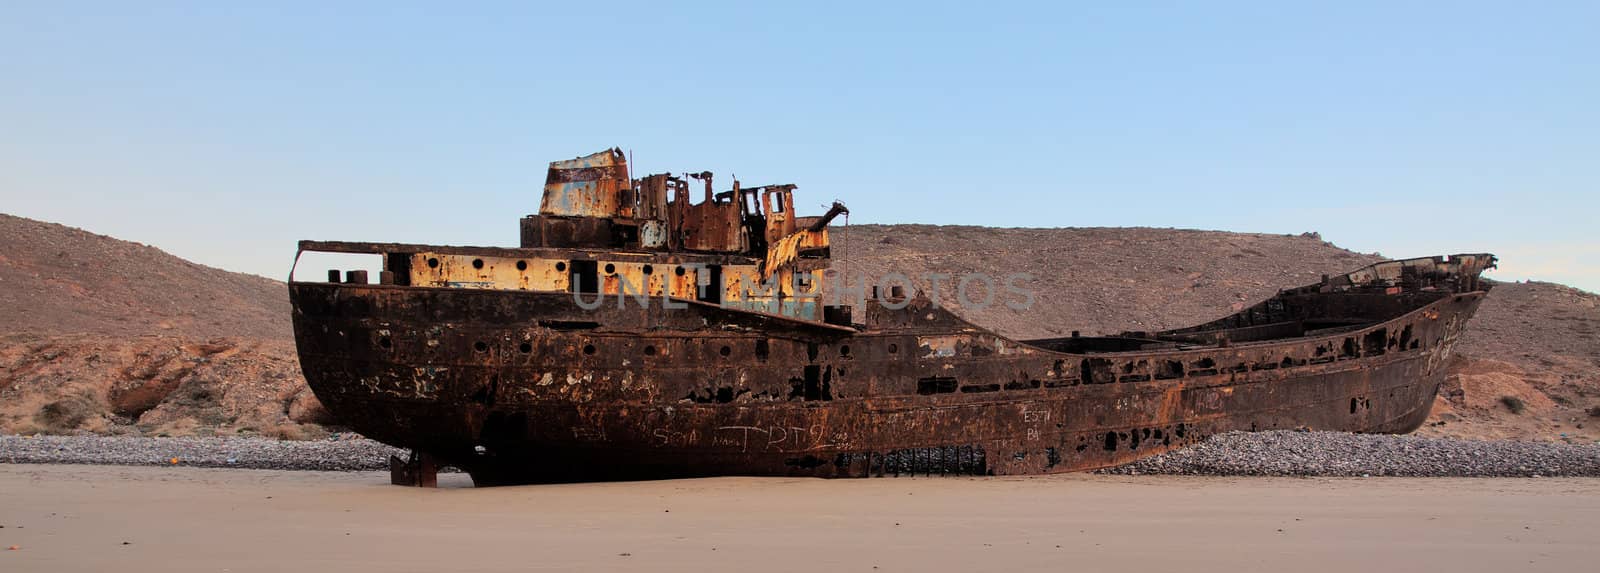 Large shipwreck on the beach in East Africa..